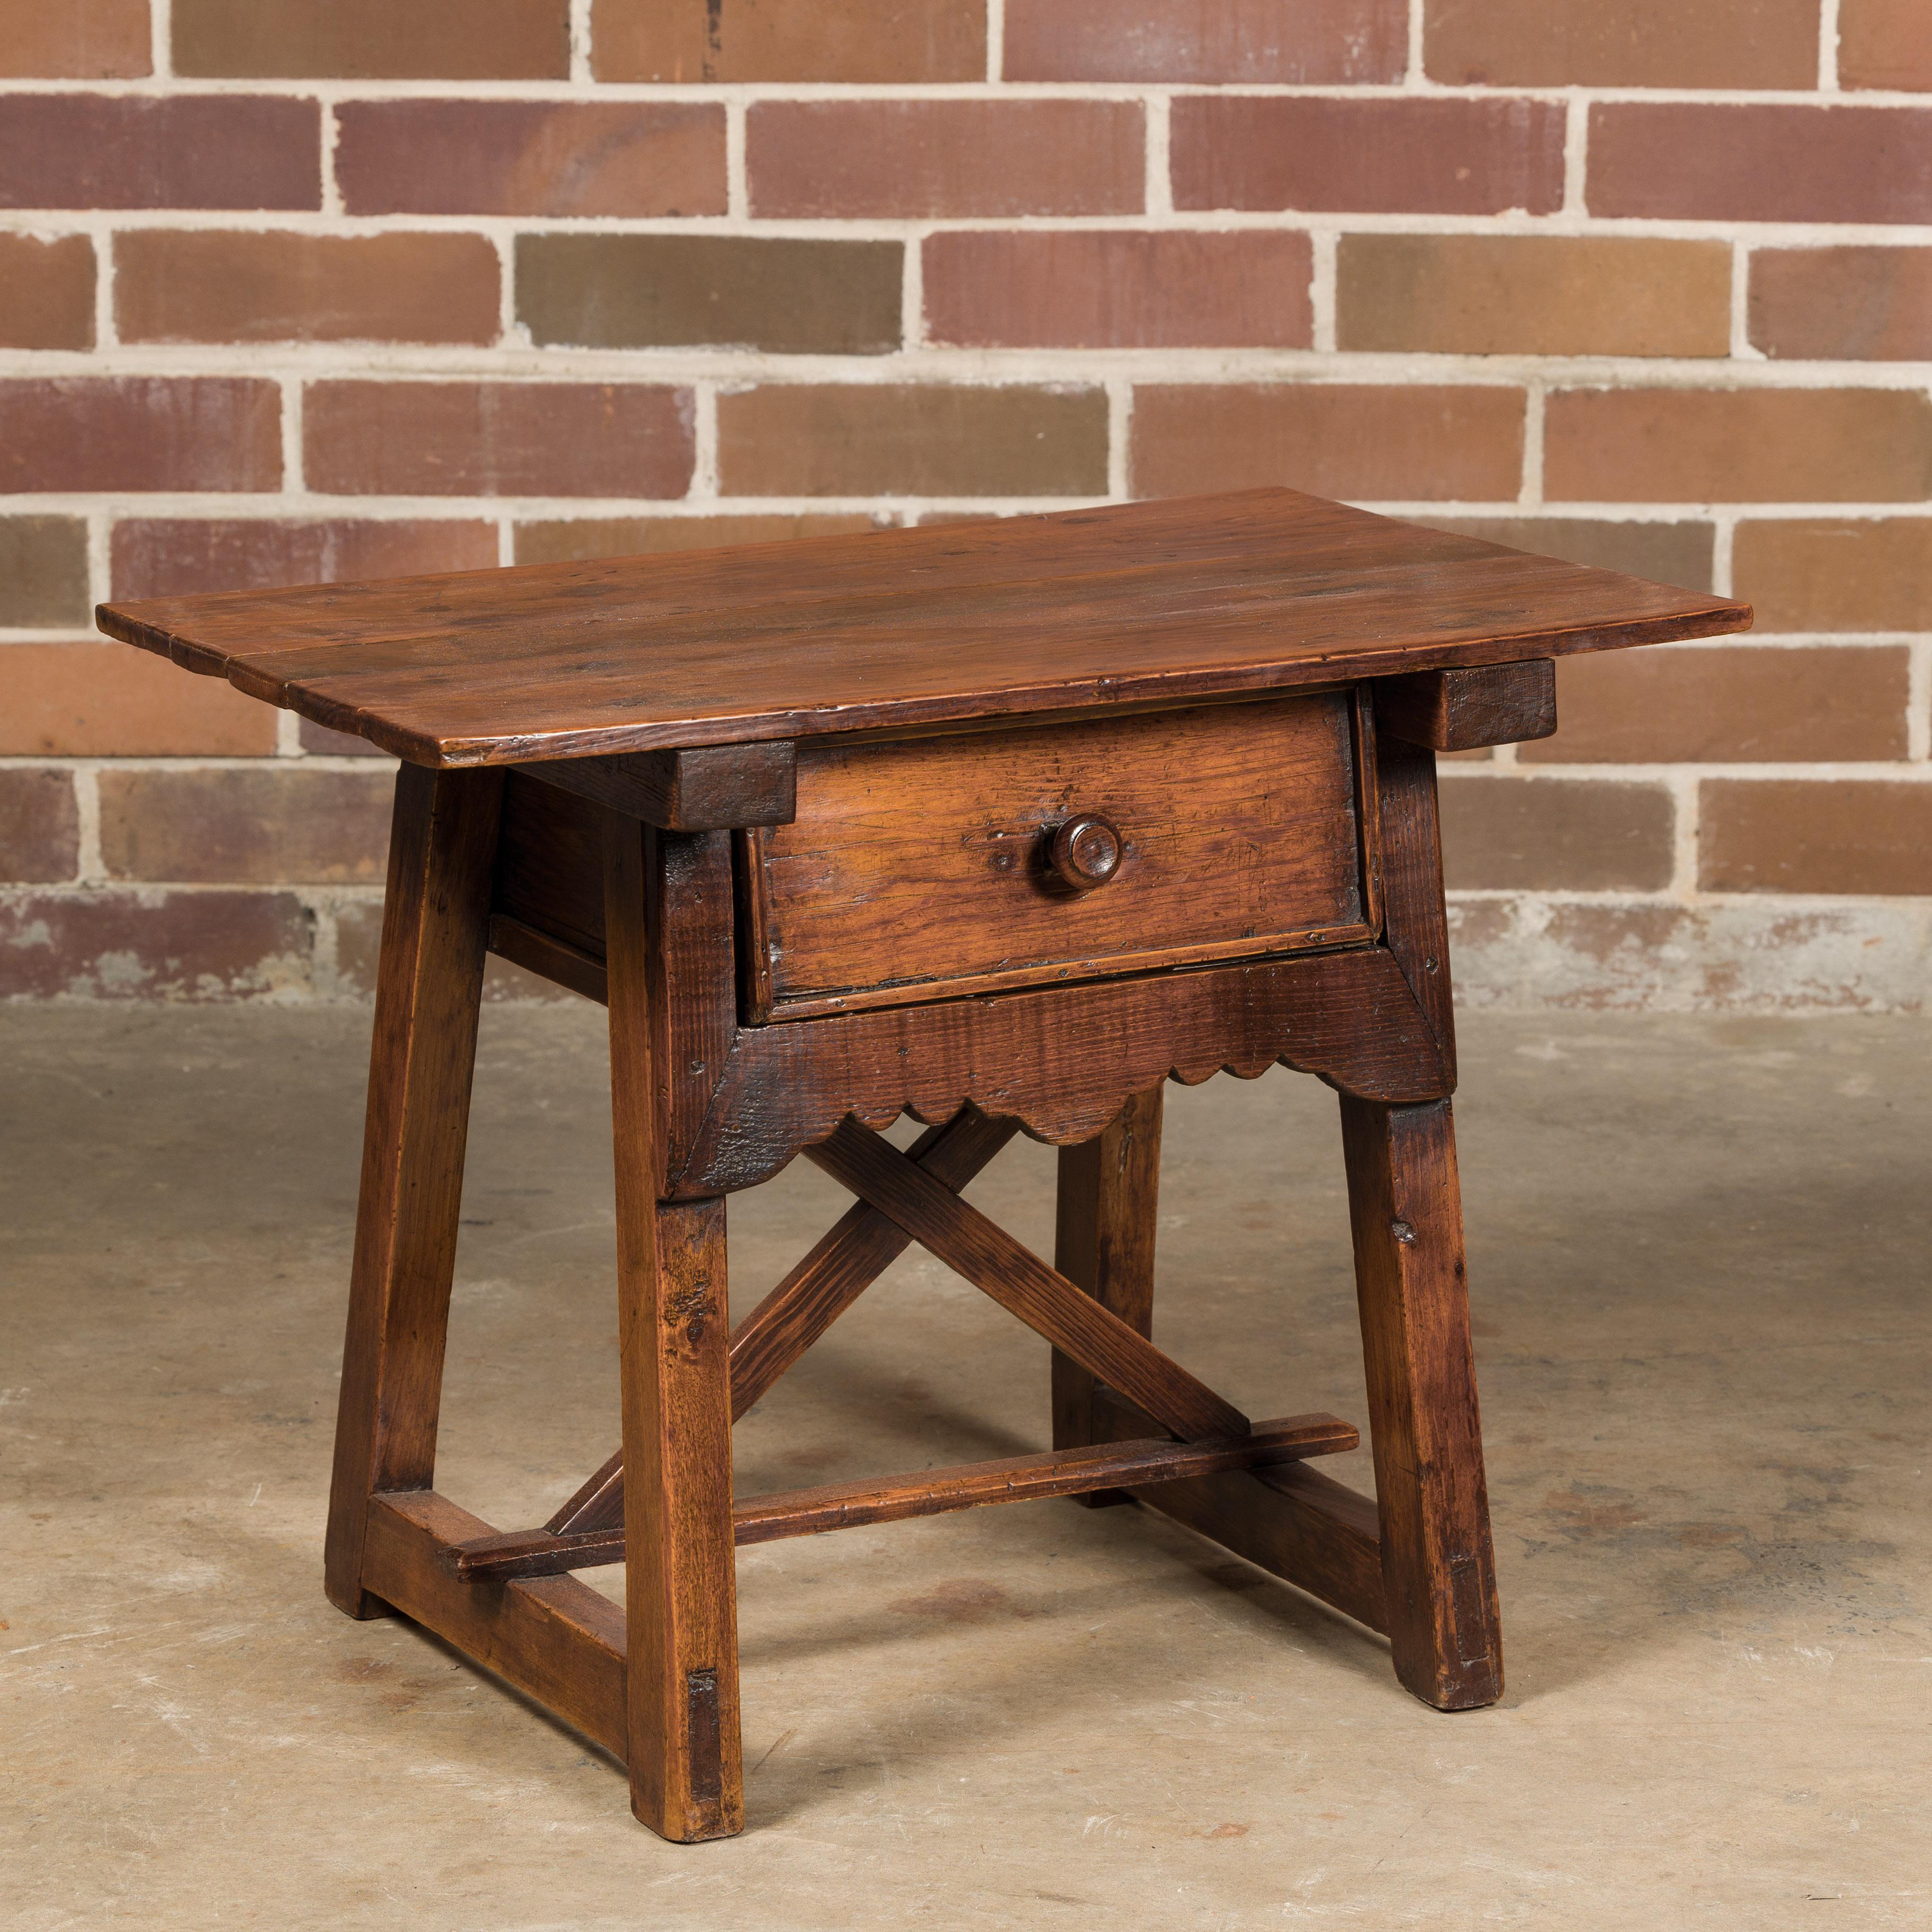 19th Century English Oak Low Side Table with Single Drawer and Carved Apron For Sale 1